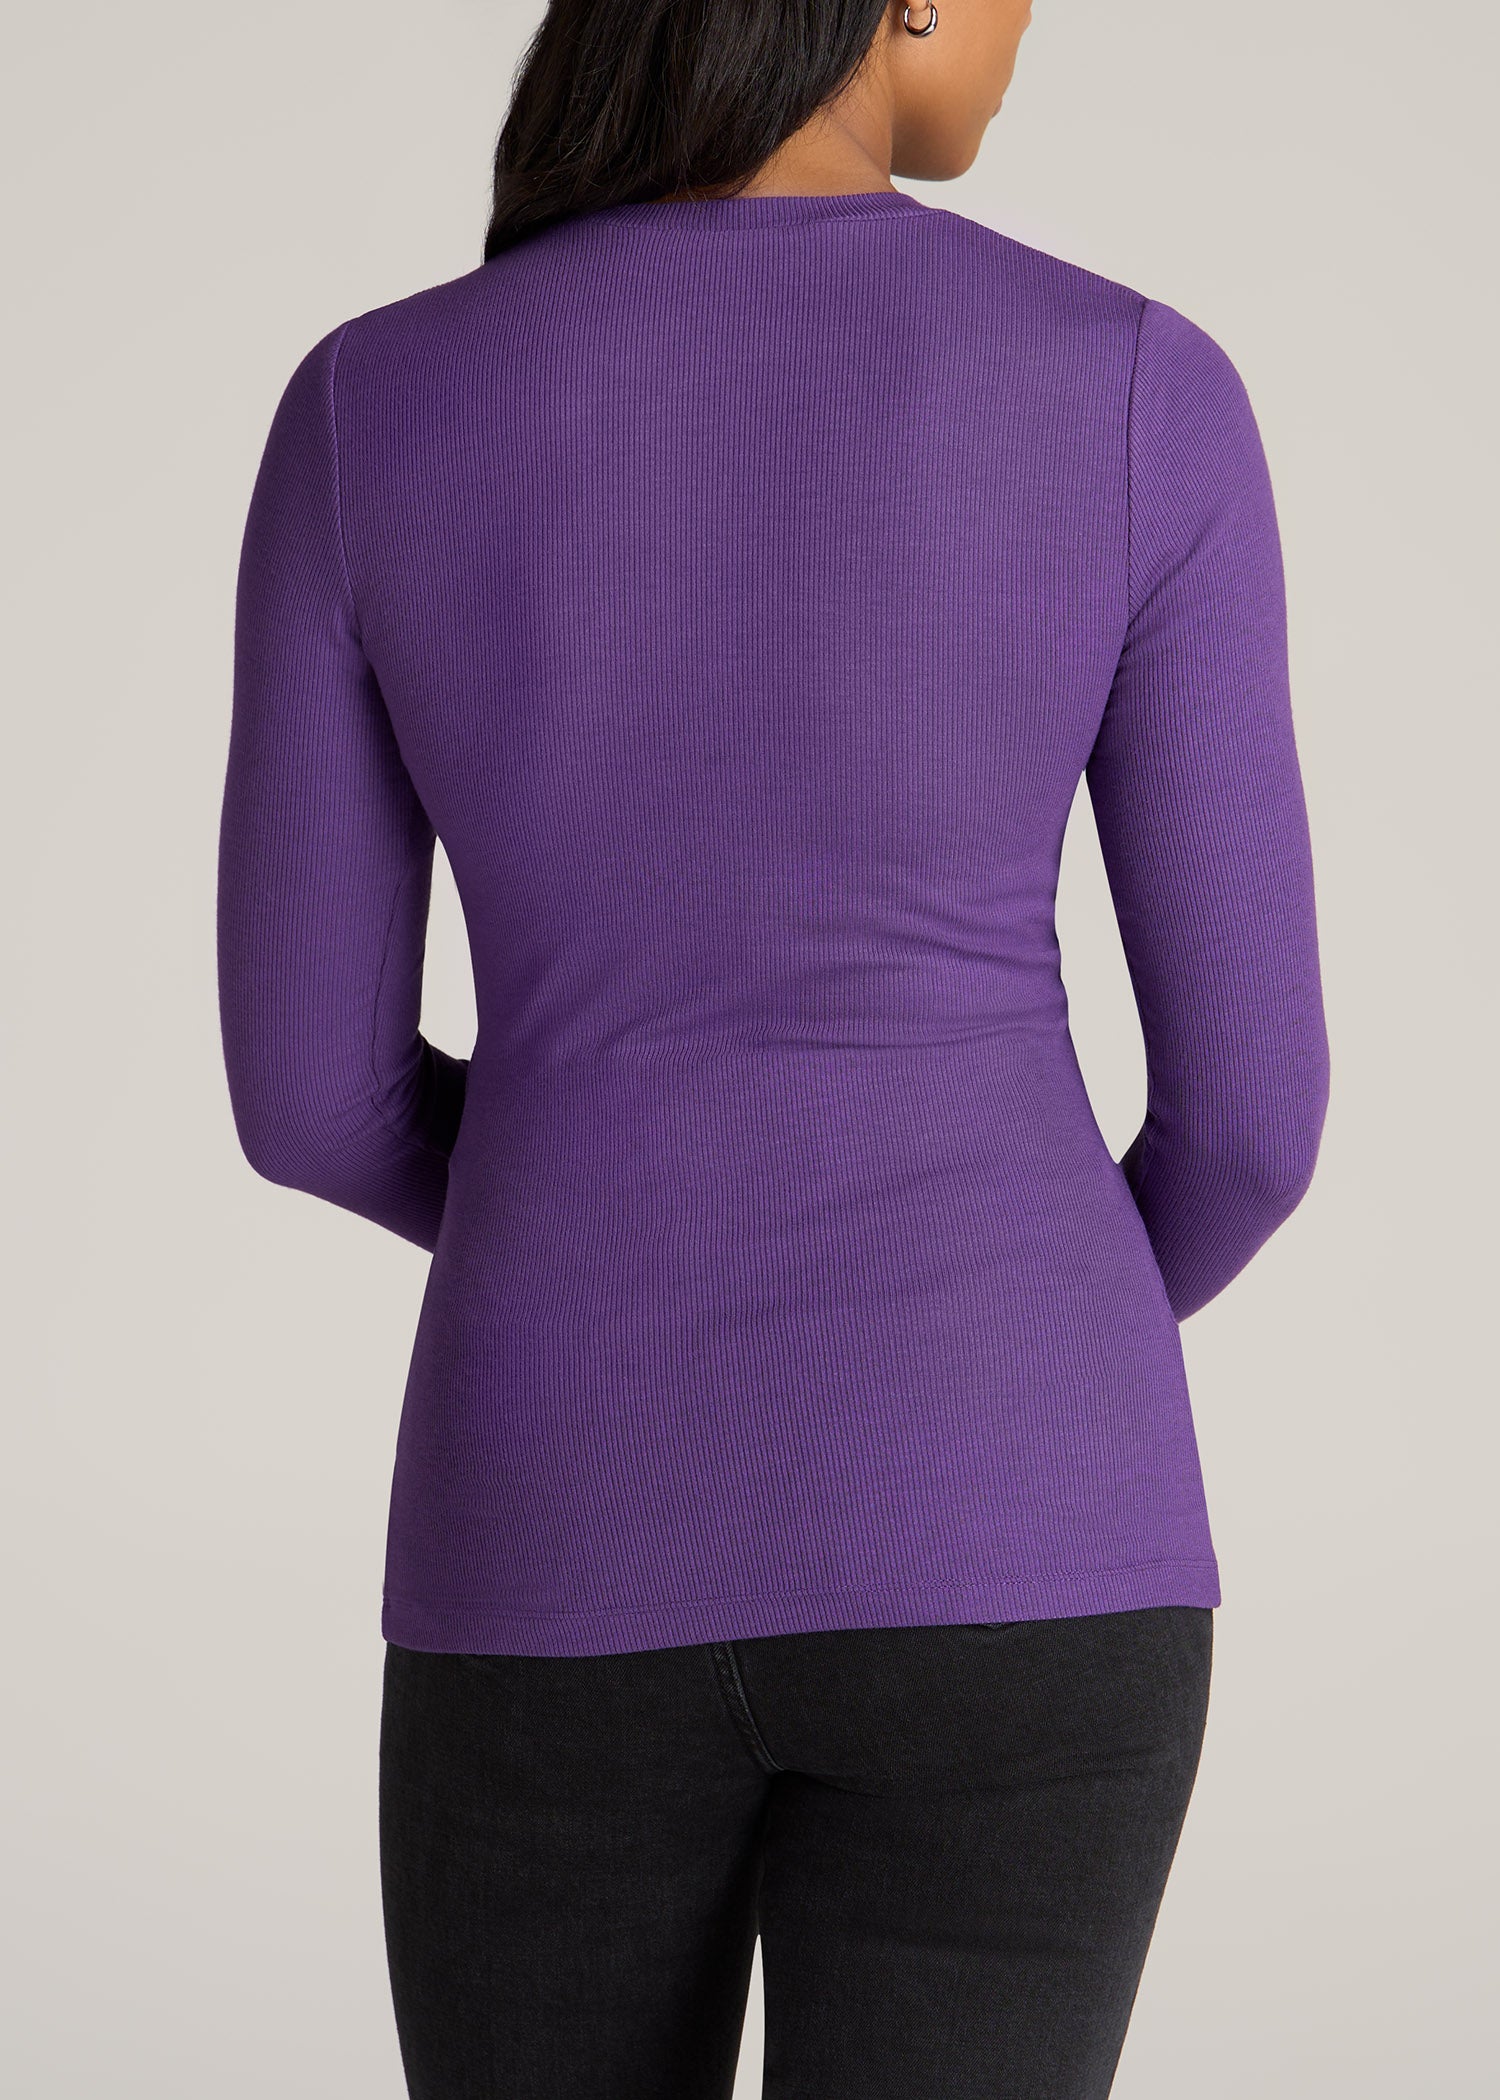 American-Tall-Women-Long-Sleeved-Ribbed-Crew-Neck-Tee-Aster-Purple-back